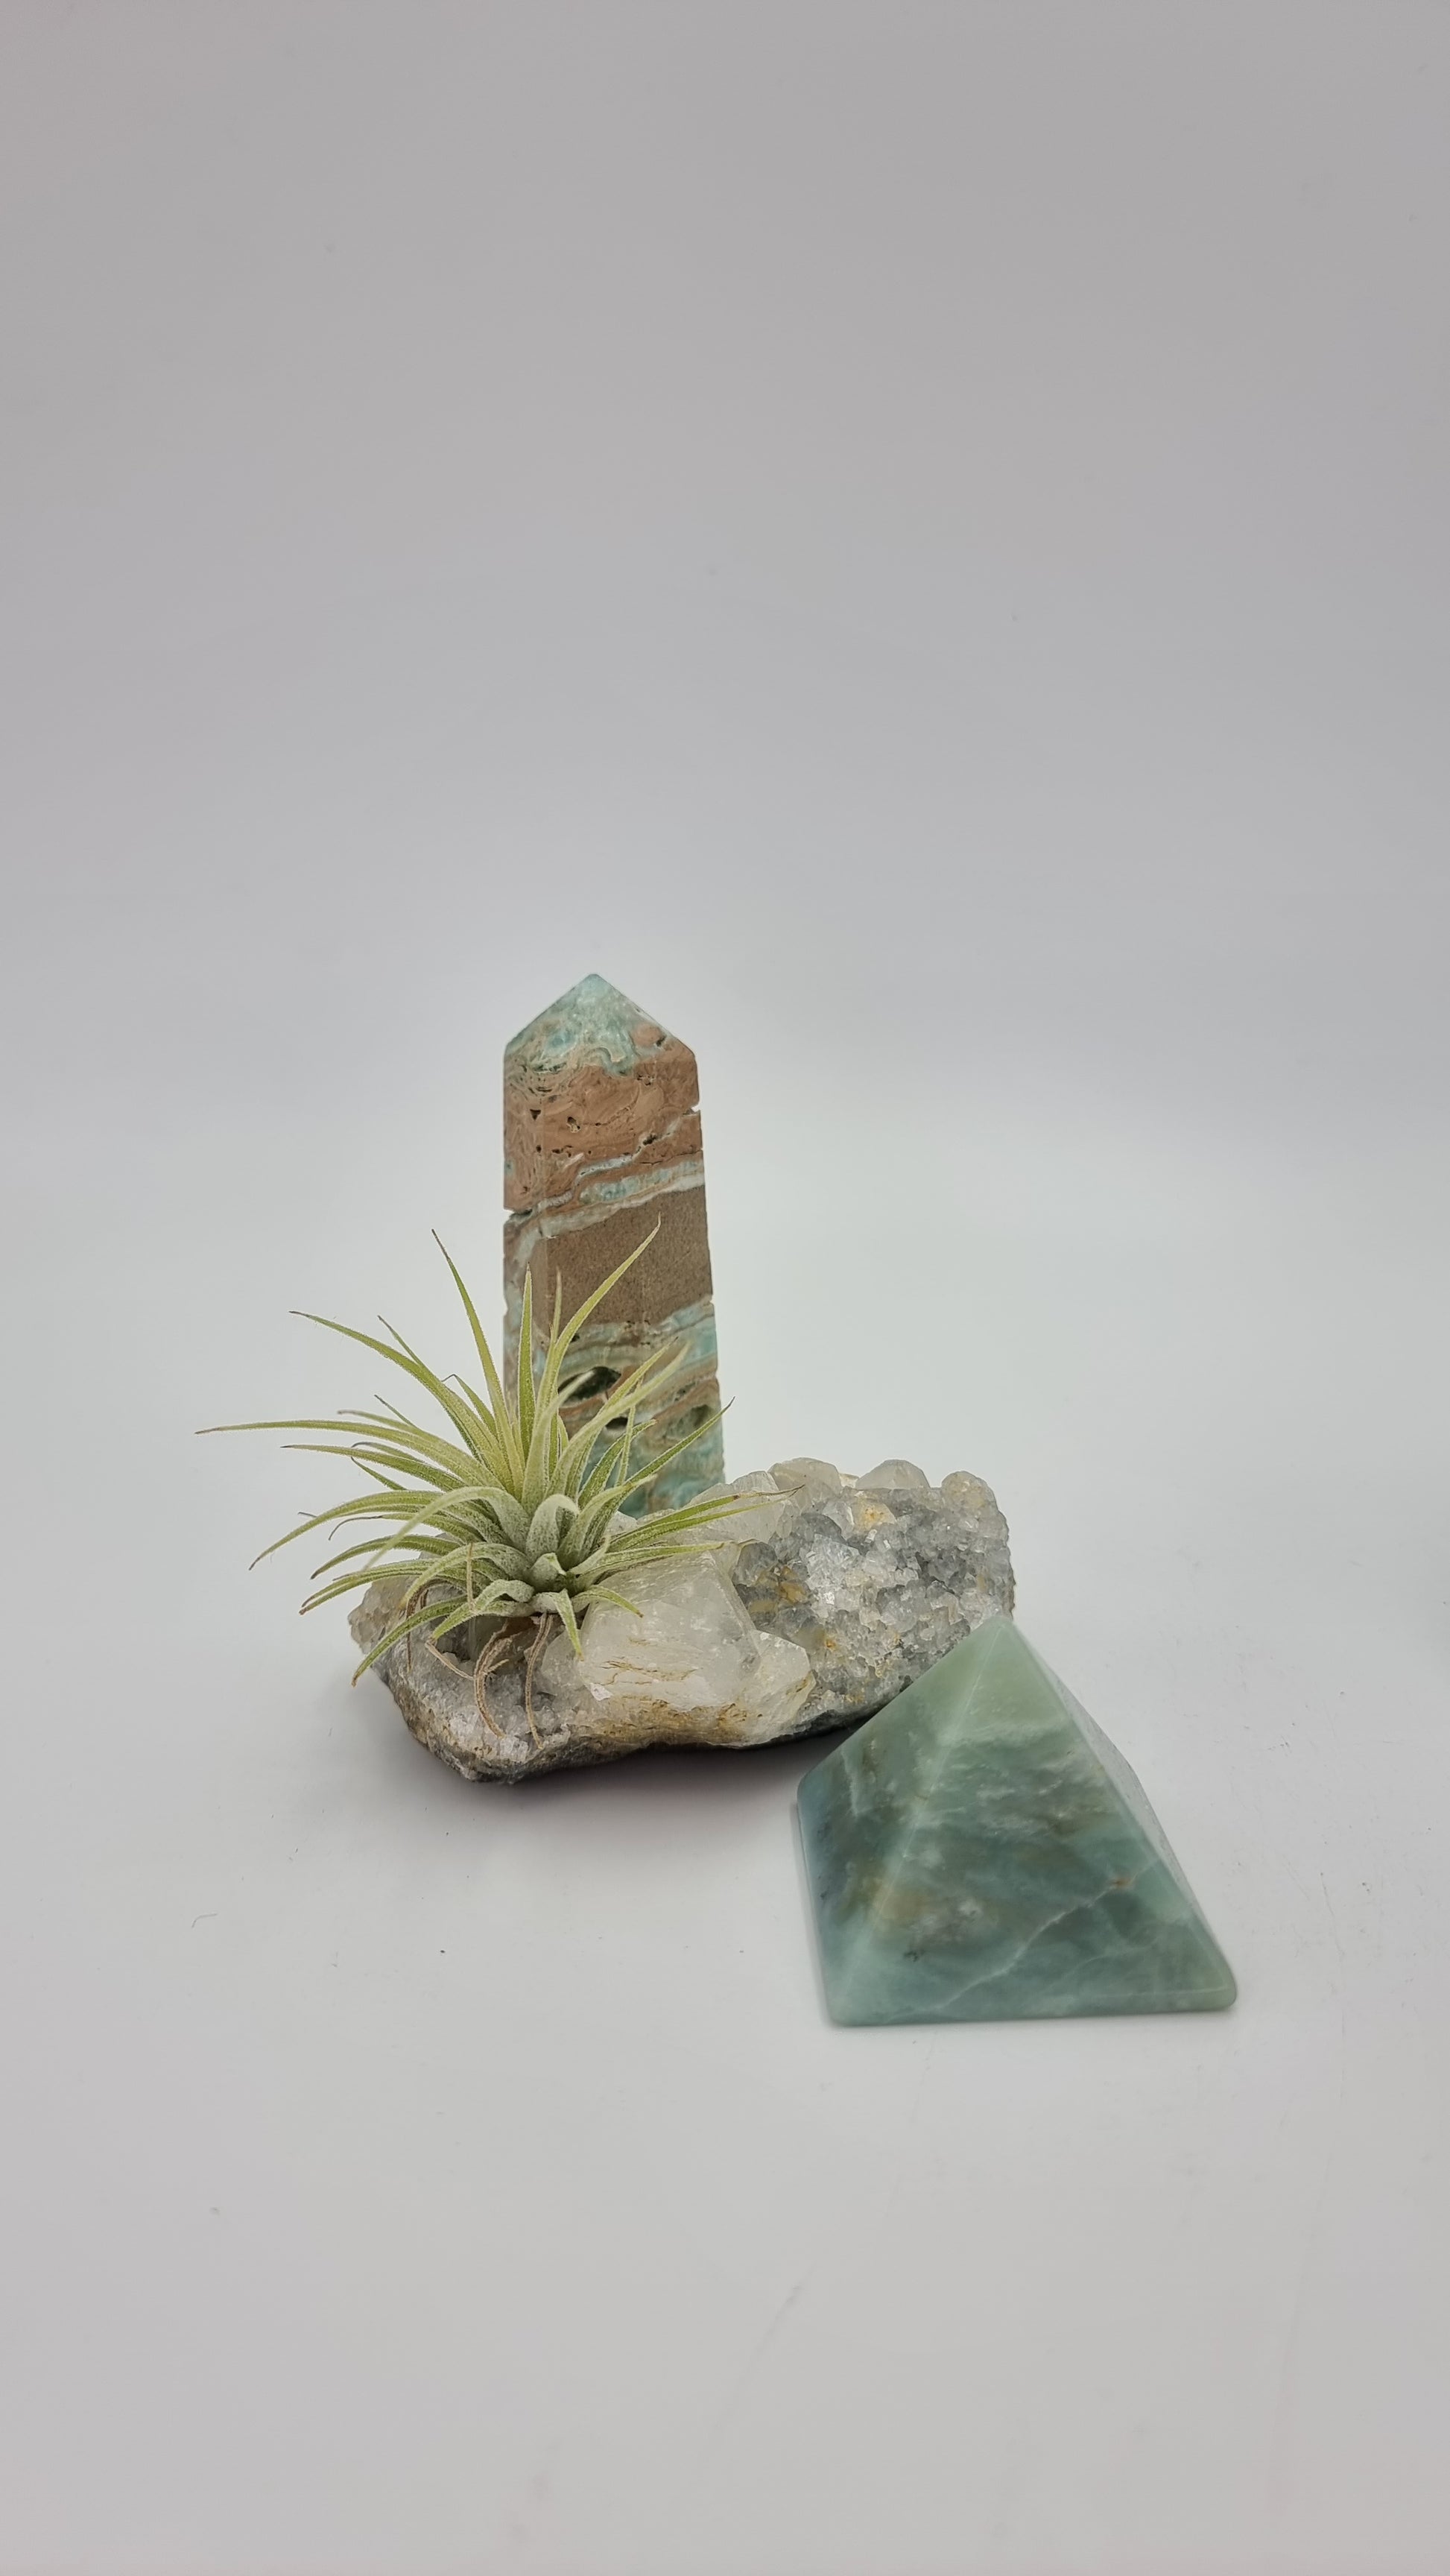 Combination of New Jade Crystal Pyramid, Caribbean Generator and Air Plant Décor